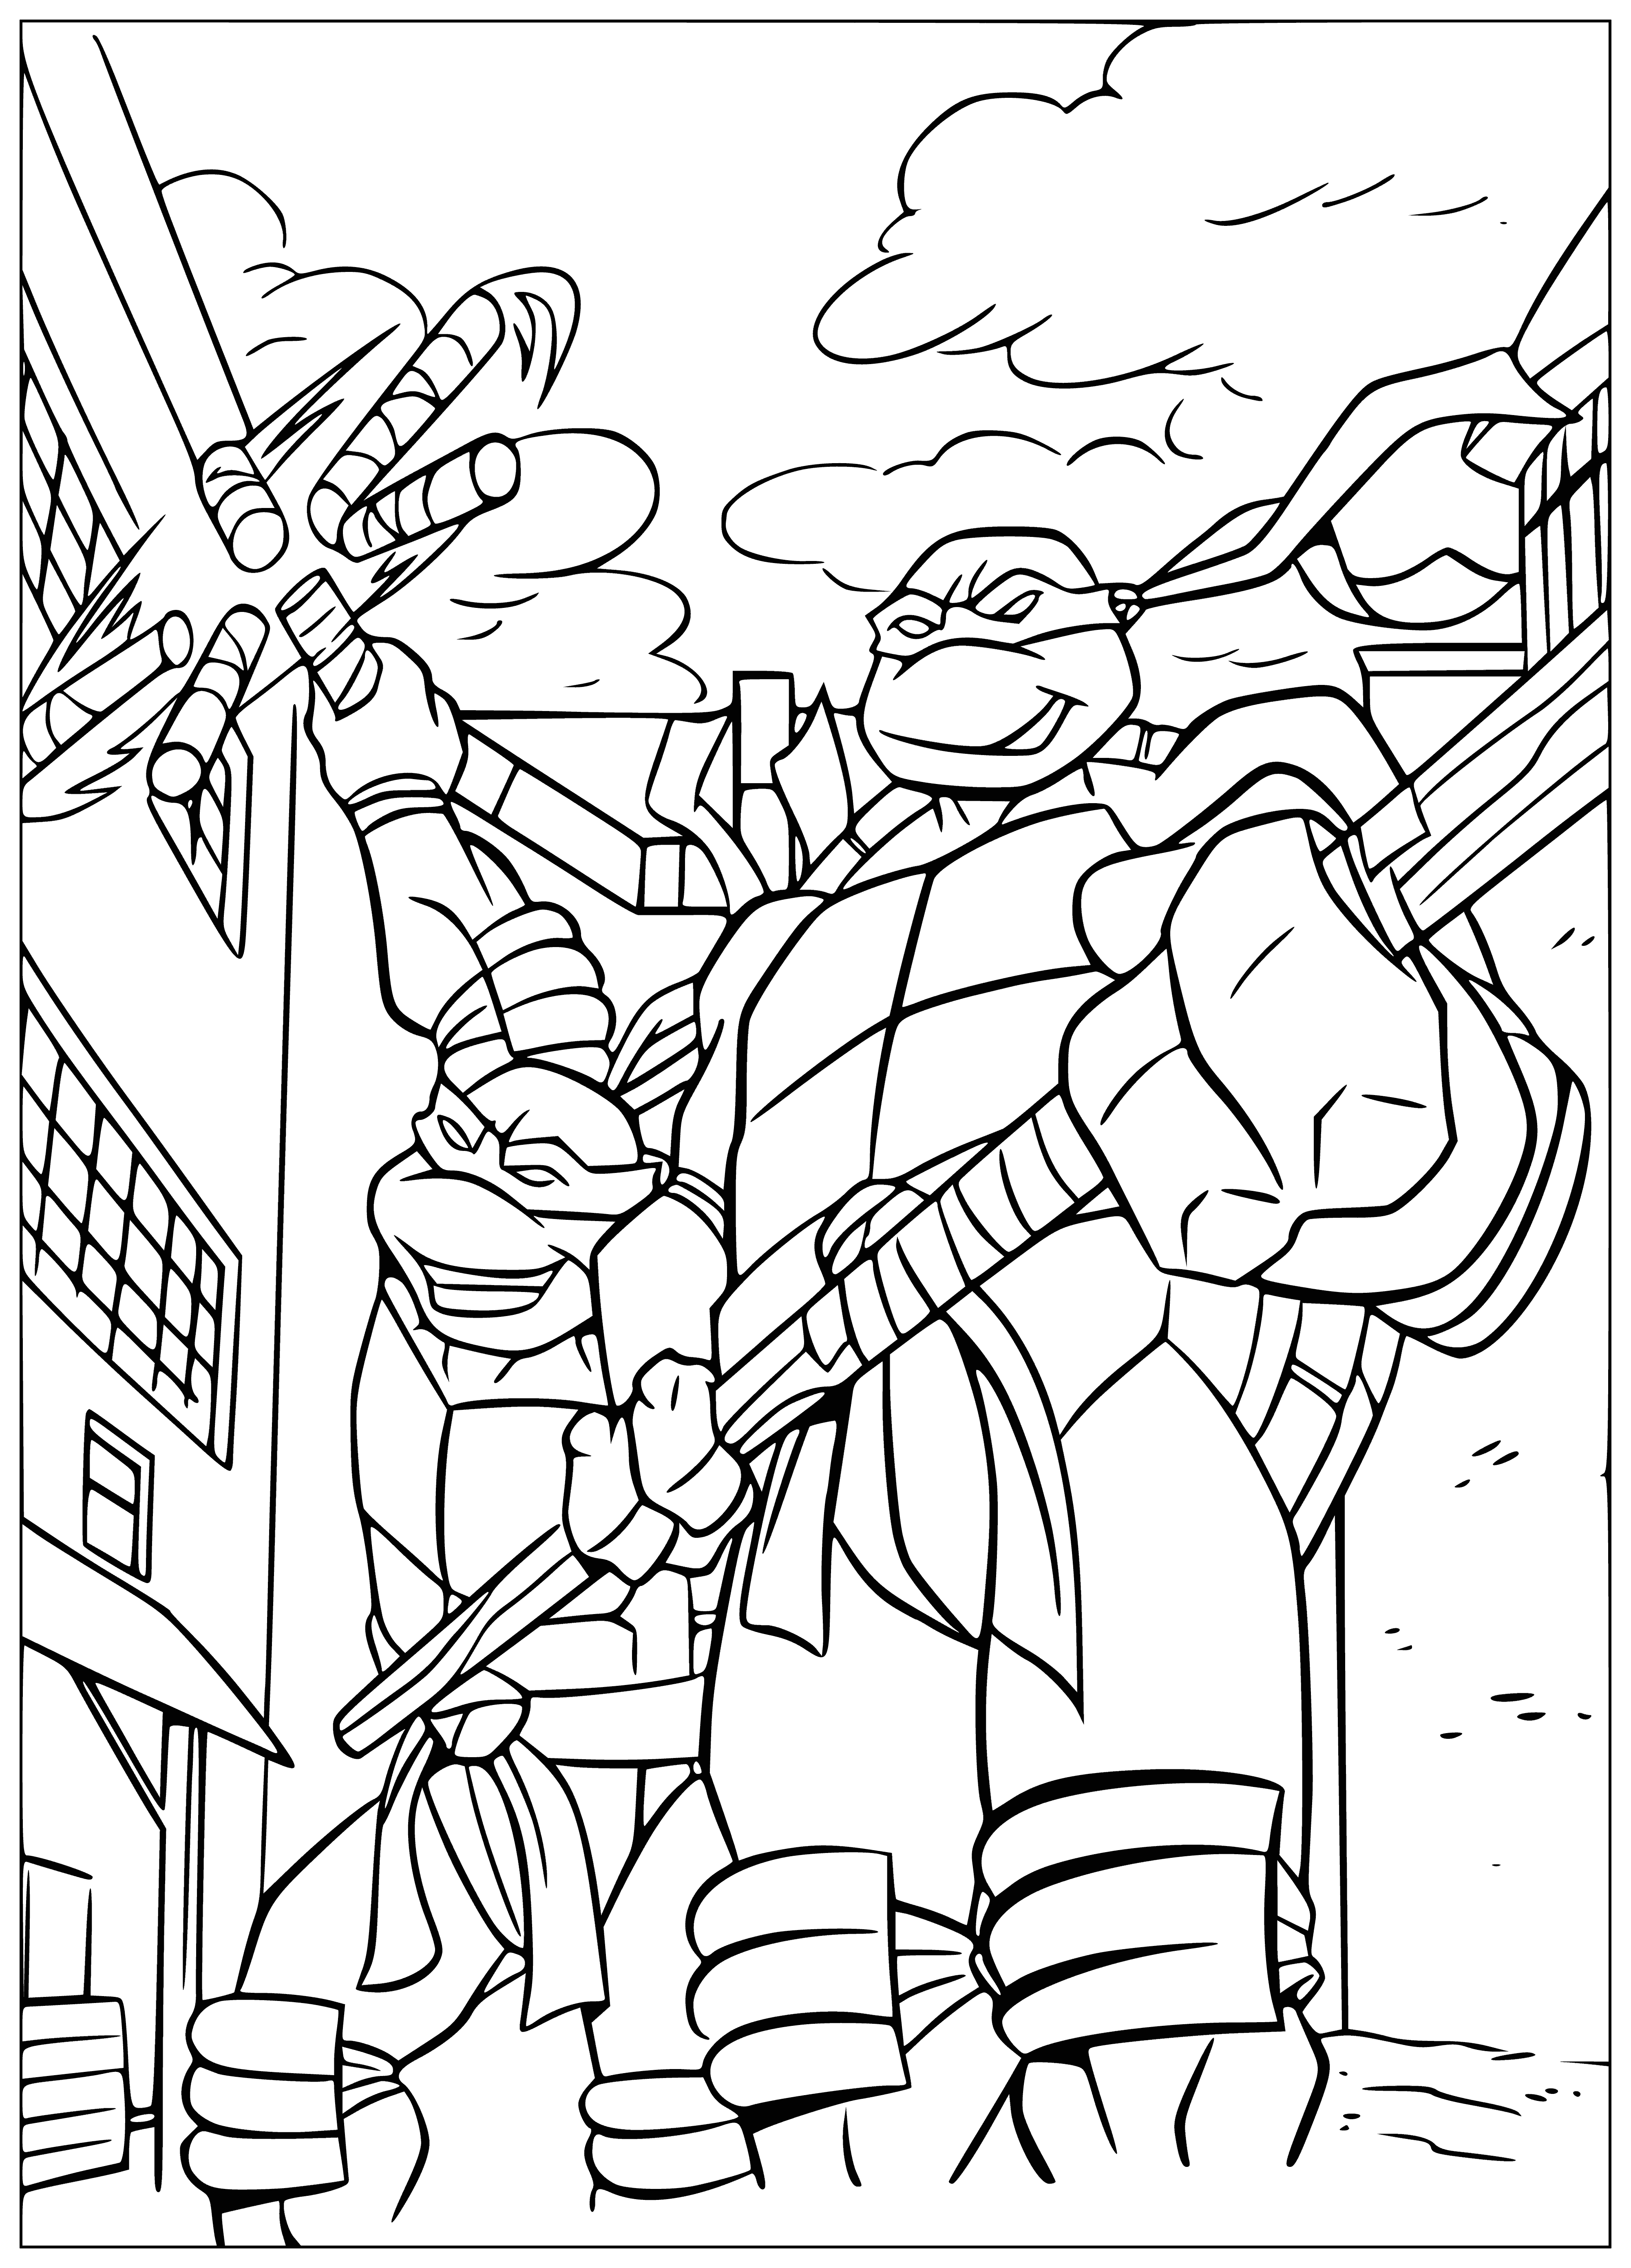 Donatello and Michelangelo coloring page